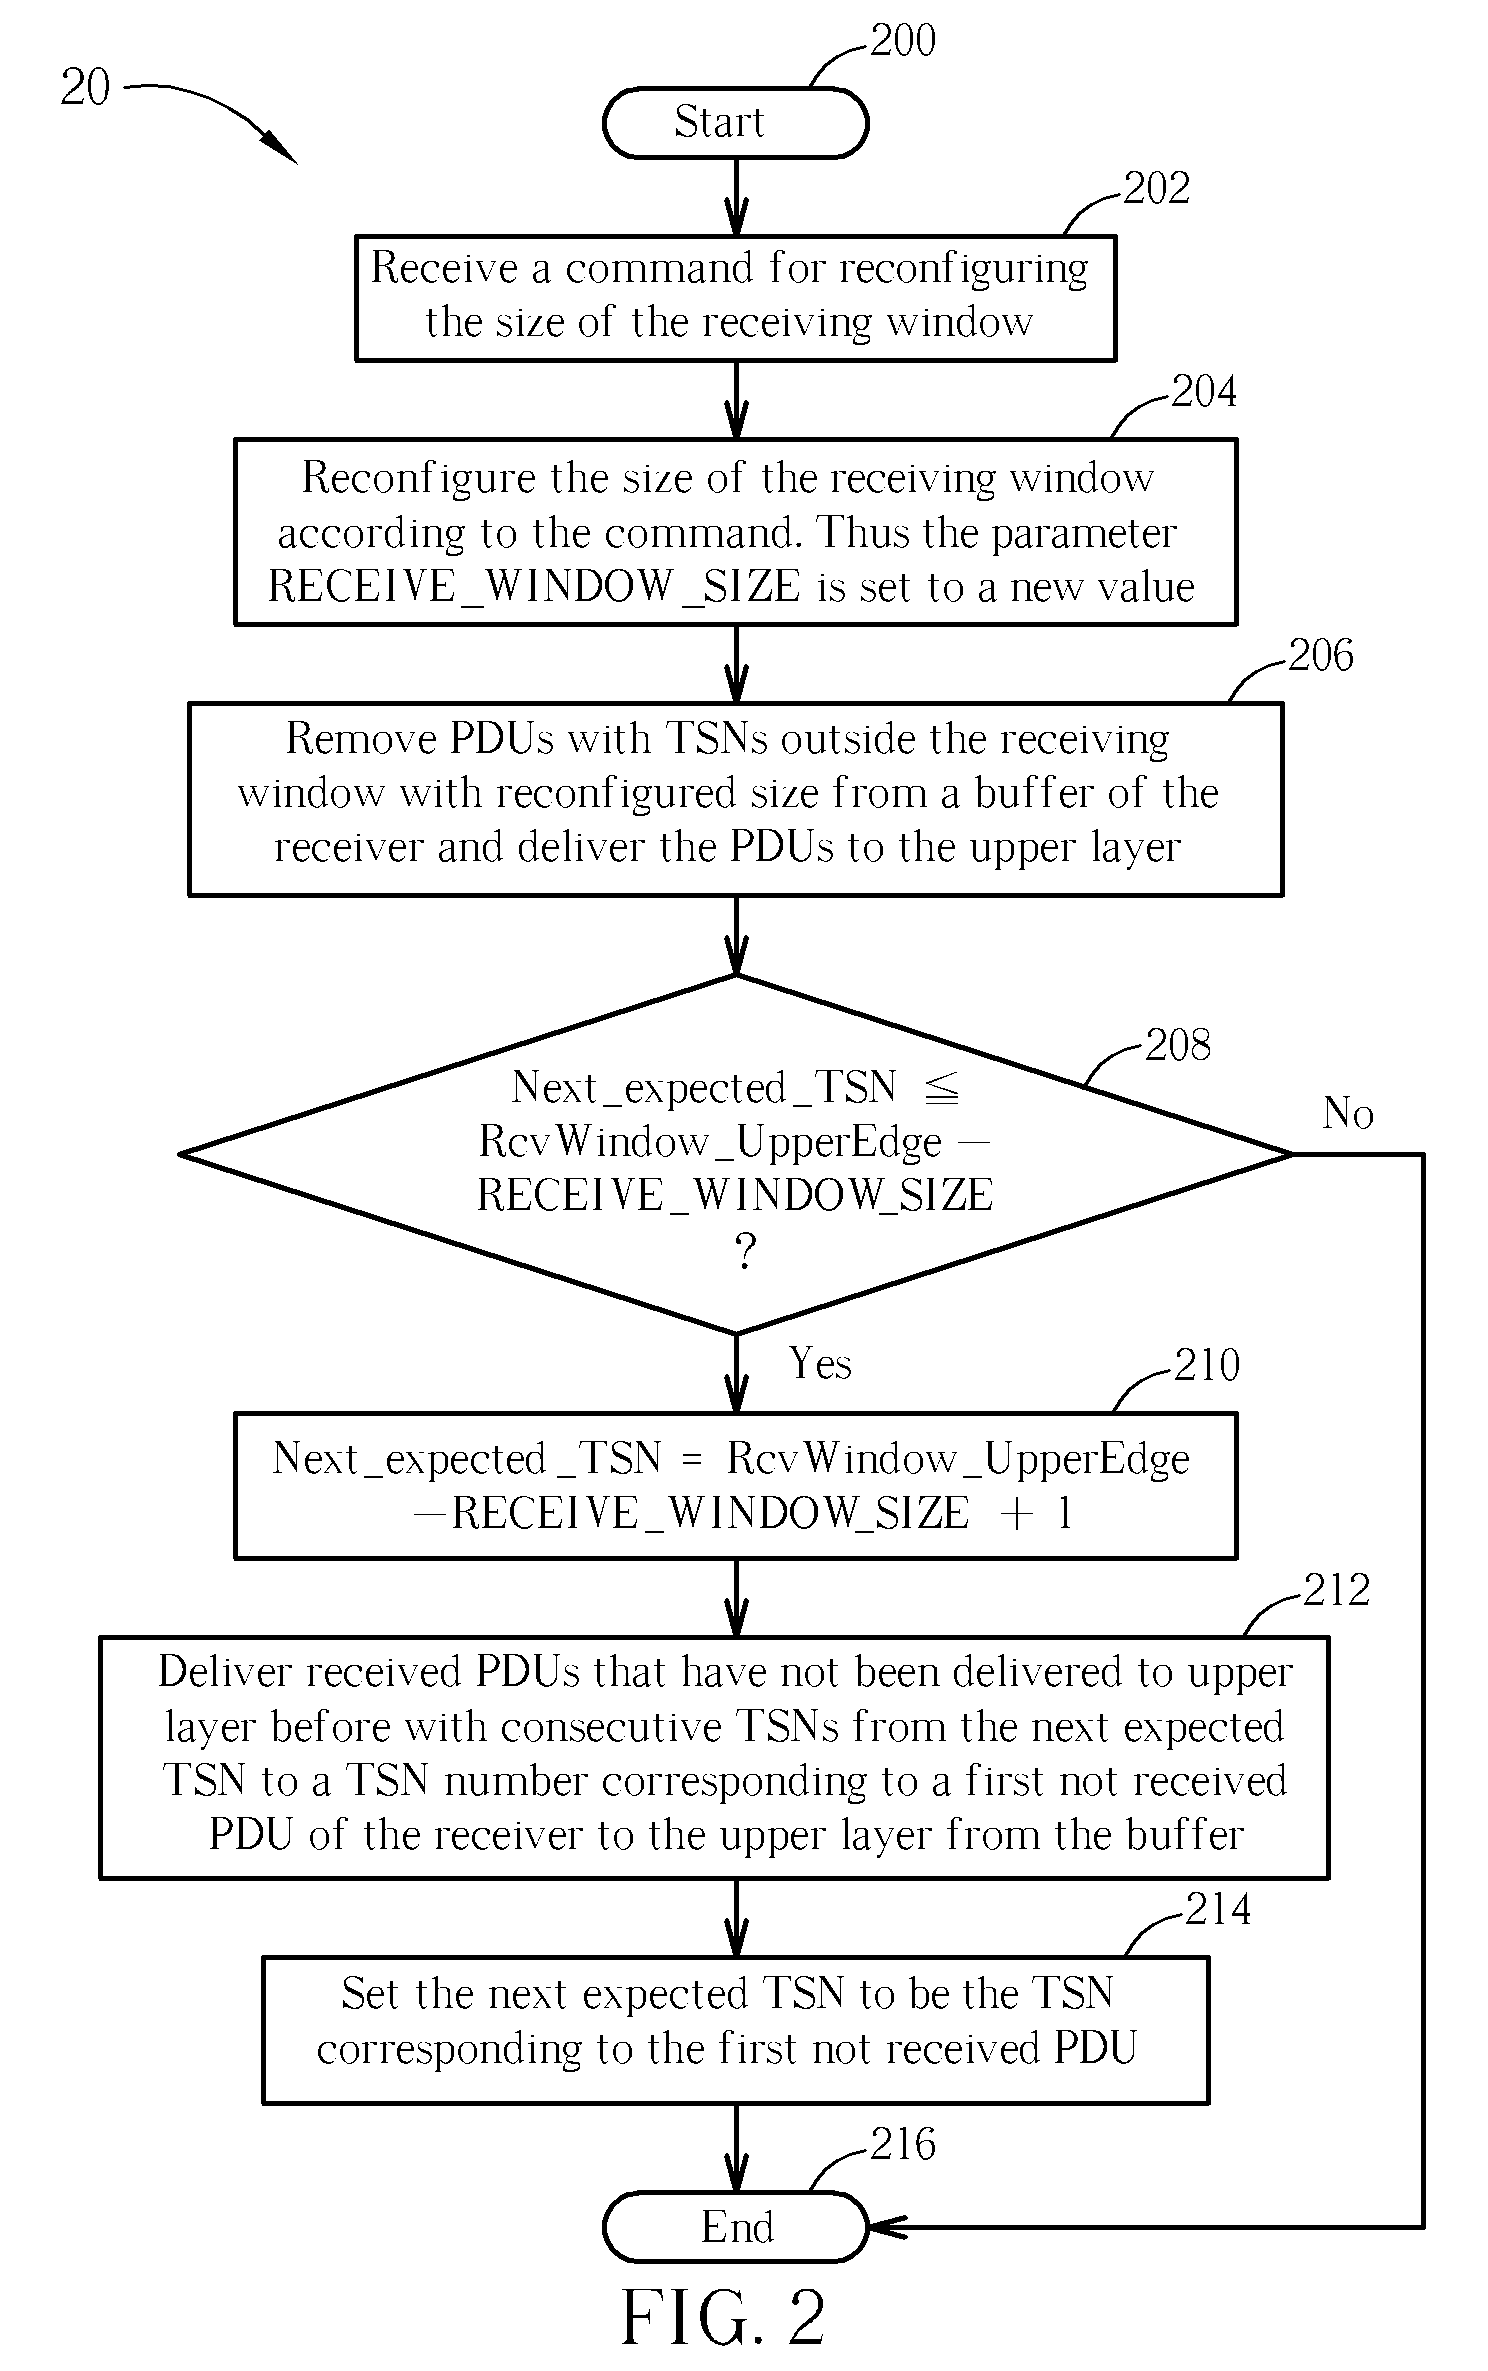 Method and Related Apparatus for Reconfiguring Size of a Receiving Window in a Communications System